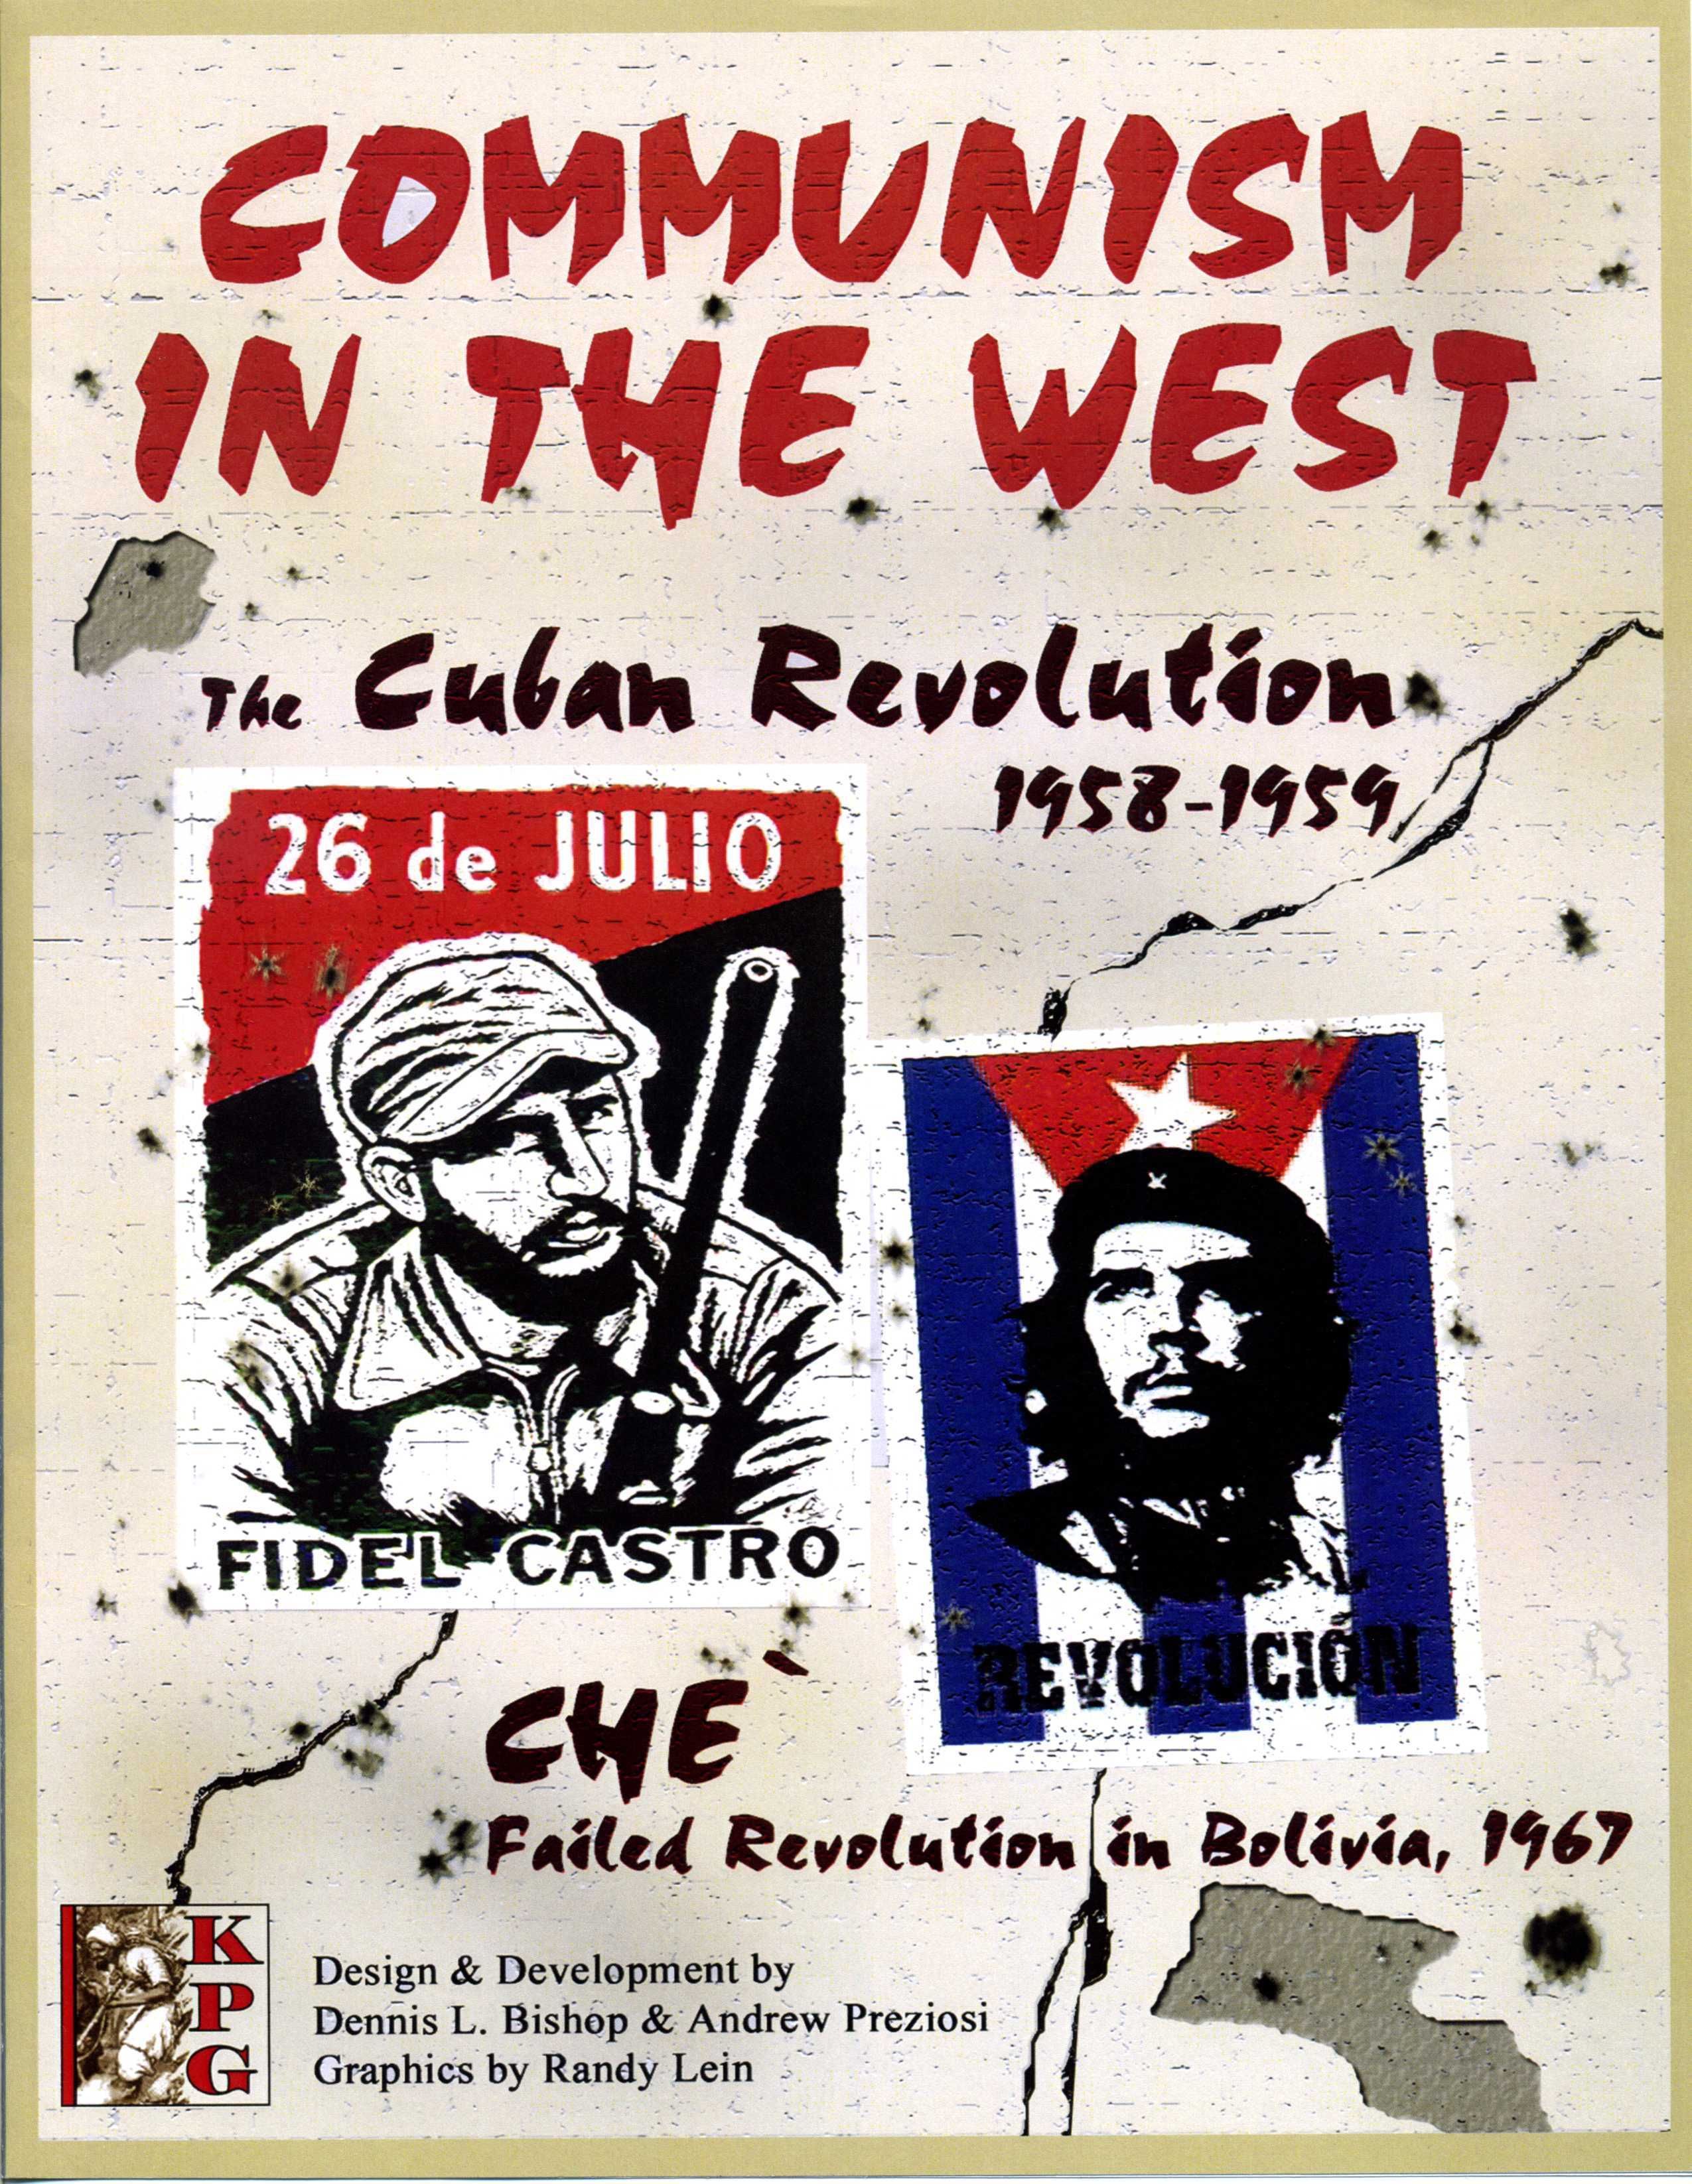 Communism in the West: The Cuban Revolution 1958-1959